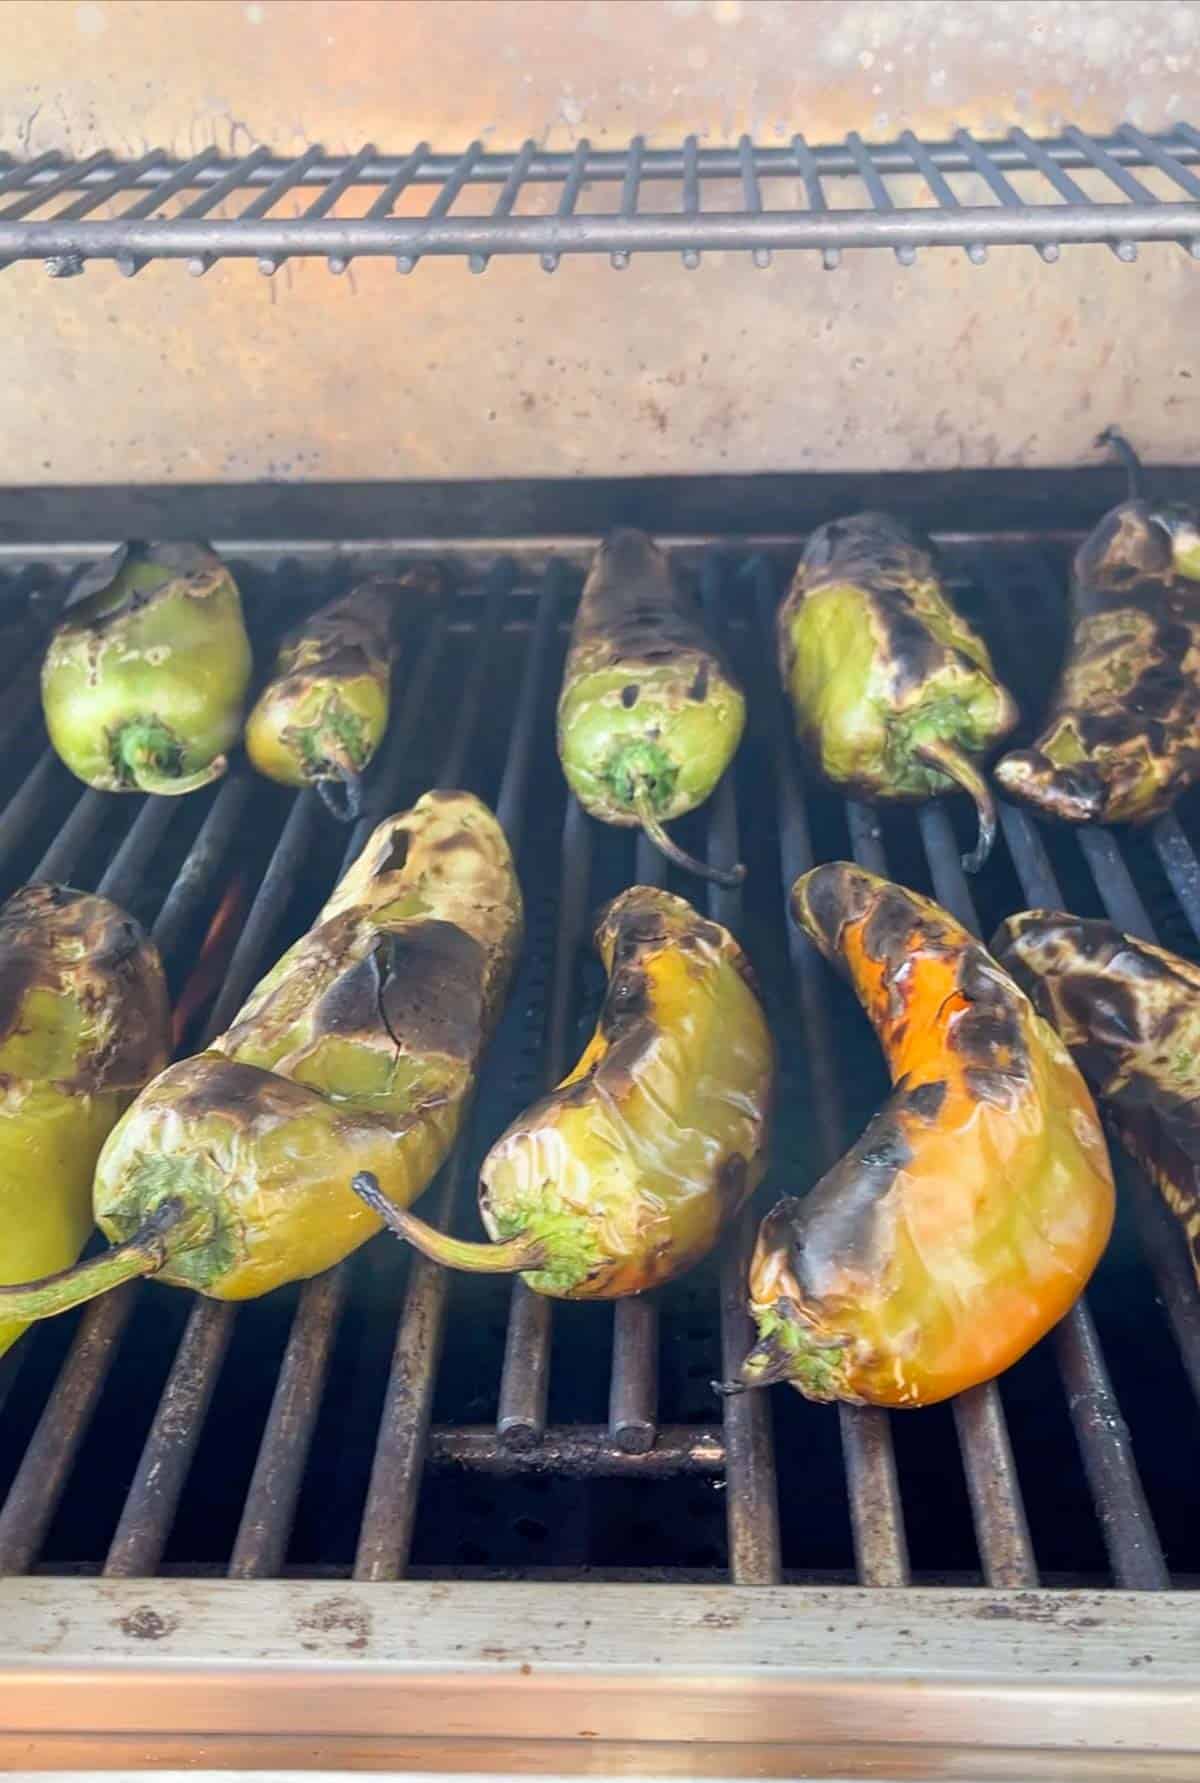 Red and green peppers being roasted on an outside grill